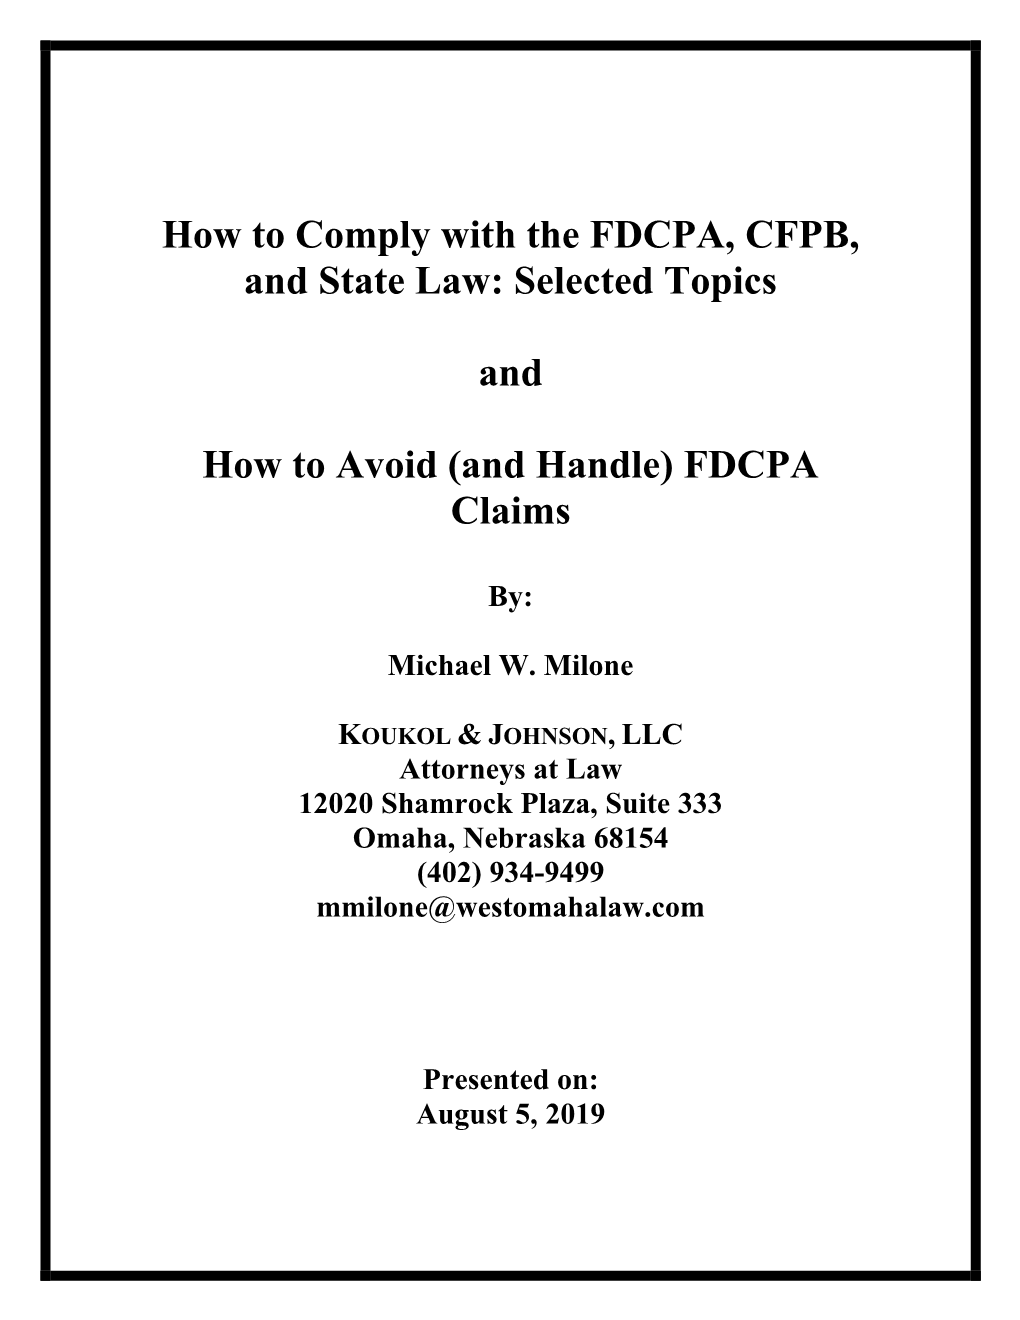 How to Comply with the FDCPA, CFPB, and State Law: Selected Topics